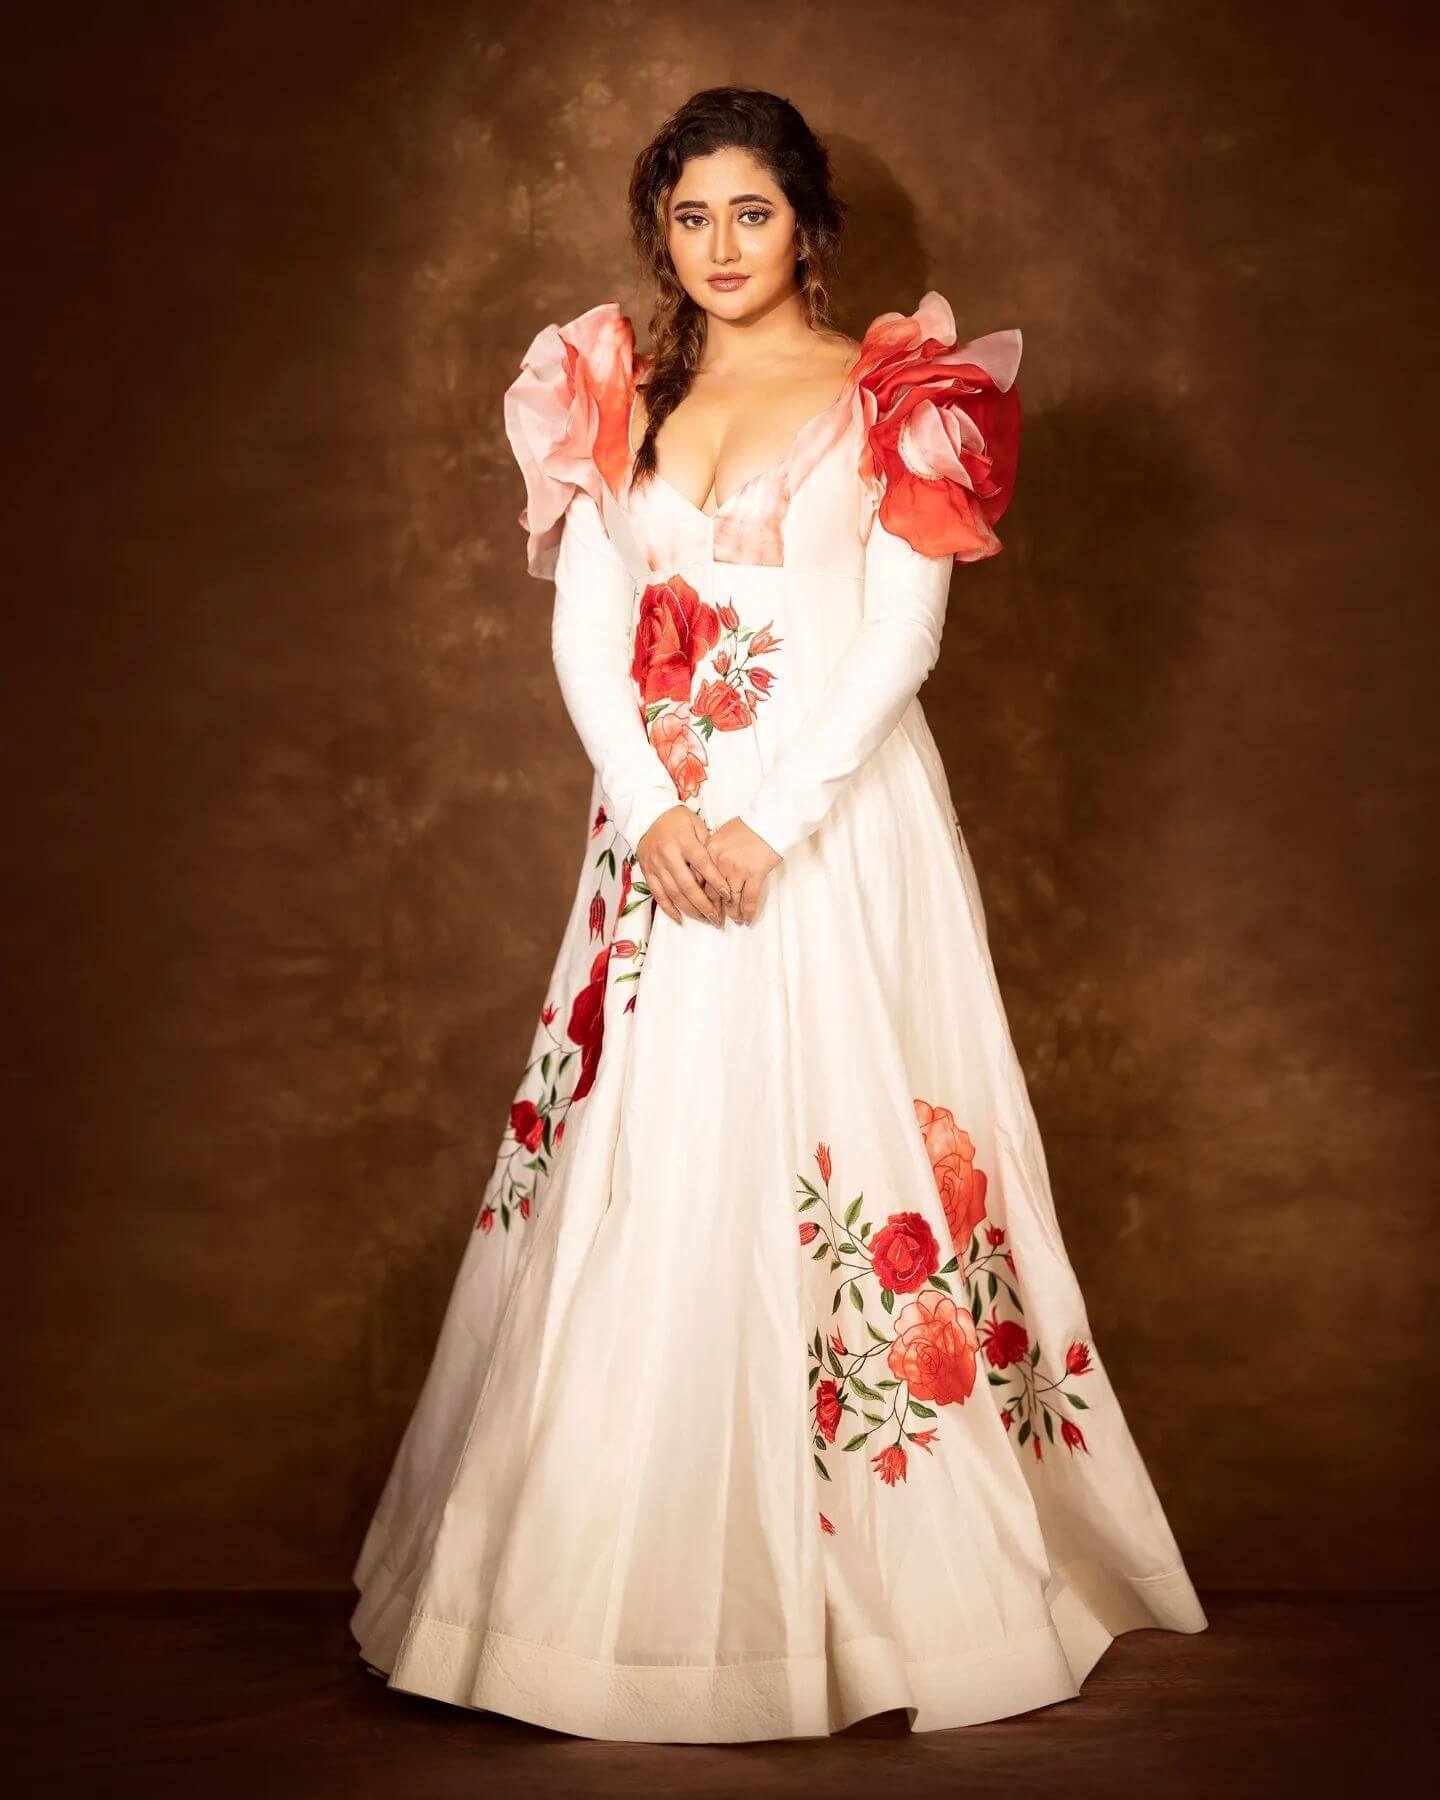 Dil Se Dil Tak Fame Rashami Desai Decked Up In White Floral Gown Featuring  Giant Rose On Both The Shoulders 